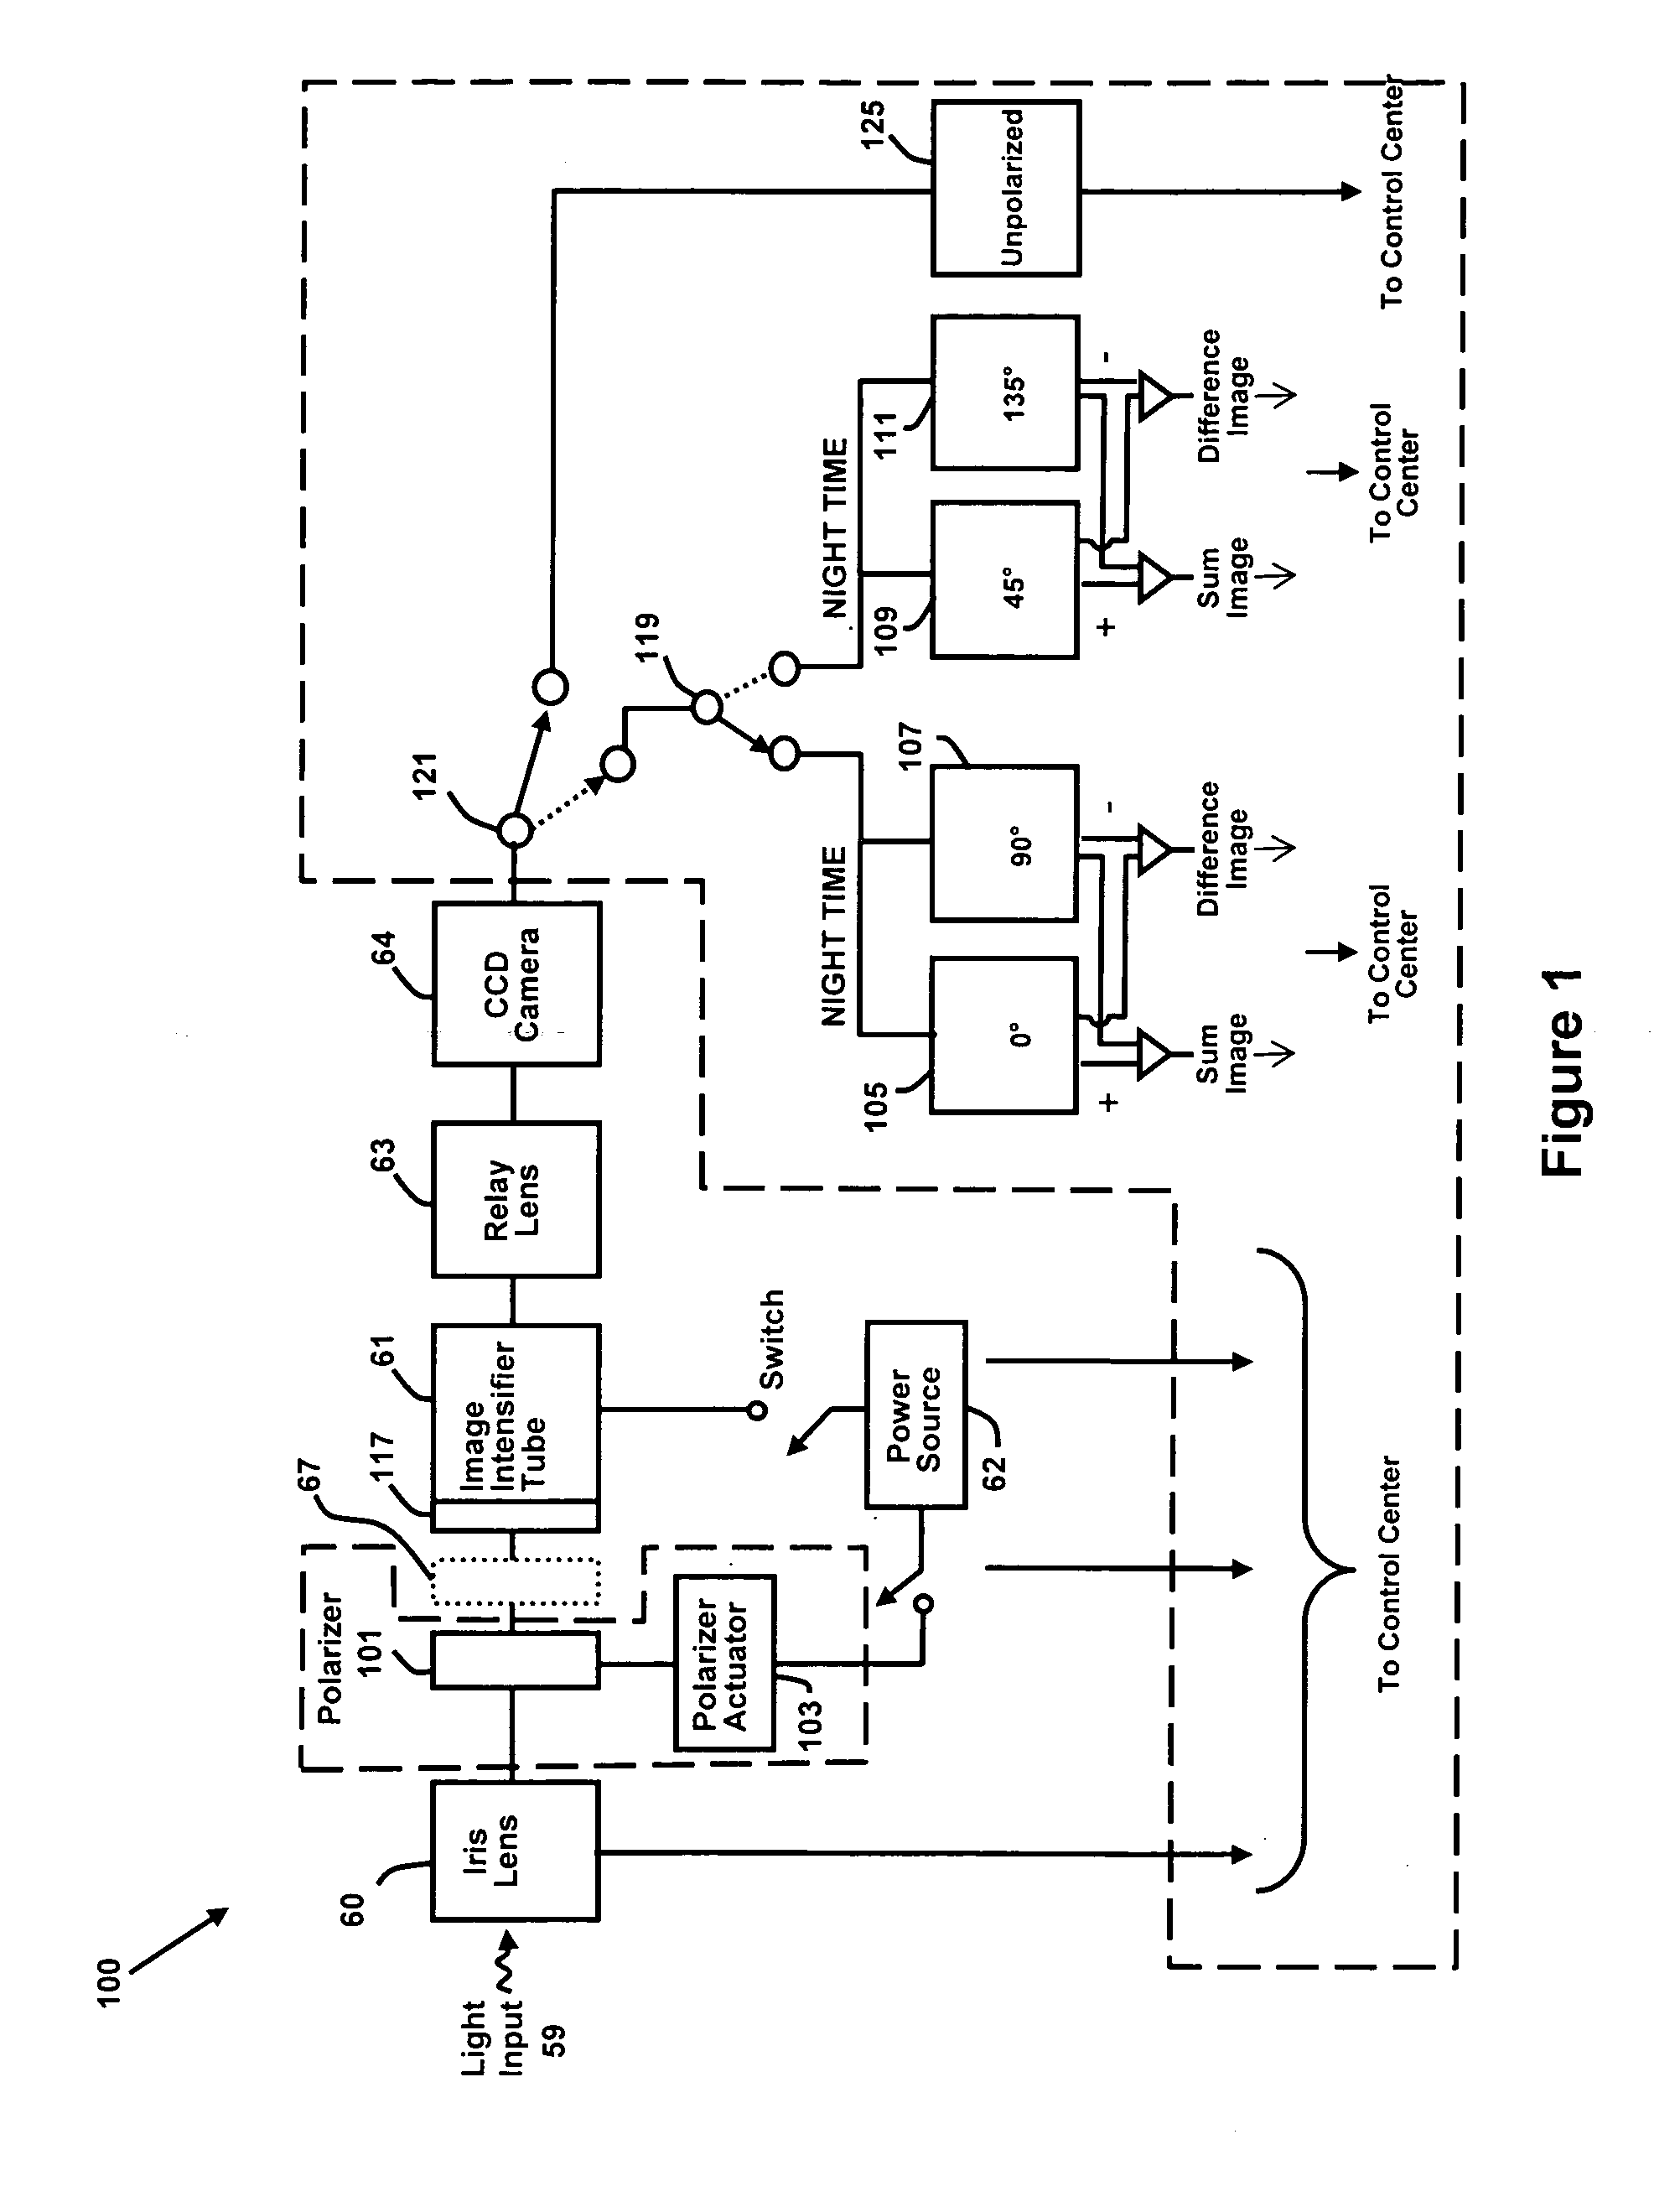 Sensor having differential polarization and a network comprised of several such sensors